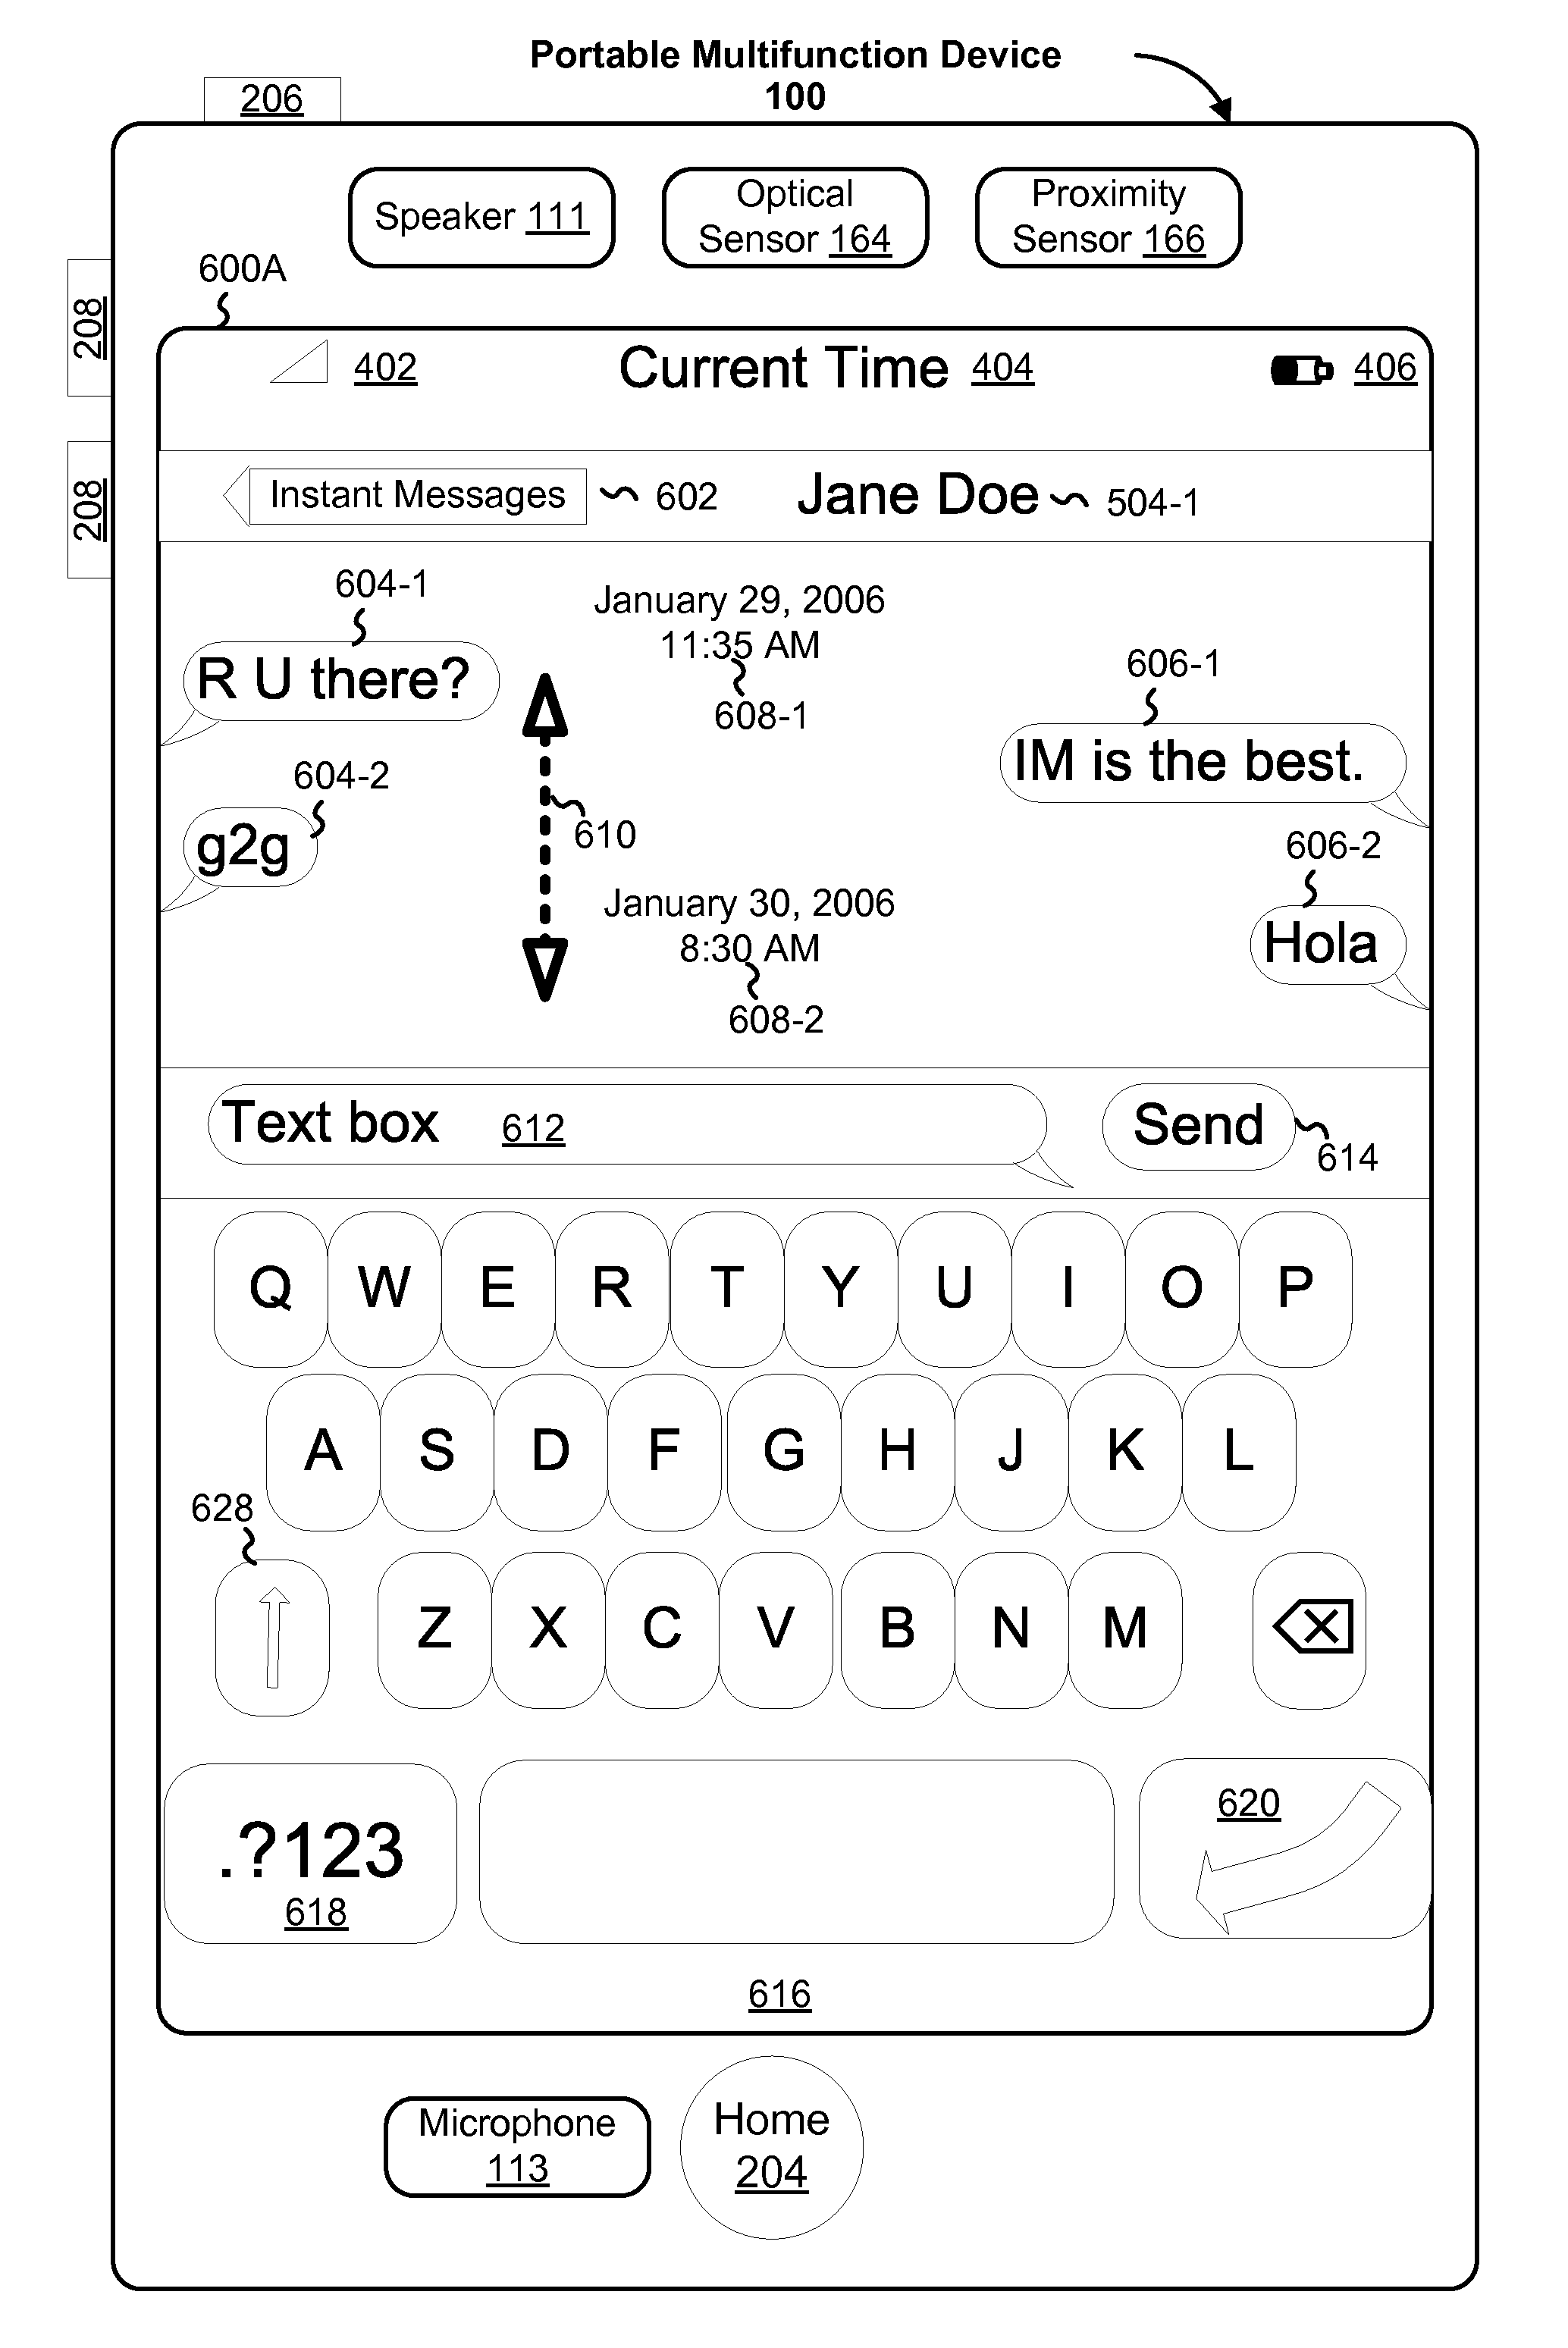 Soft Keyboard Display for a Portable Multifunction Device